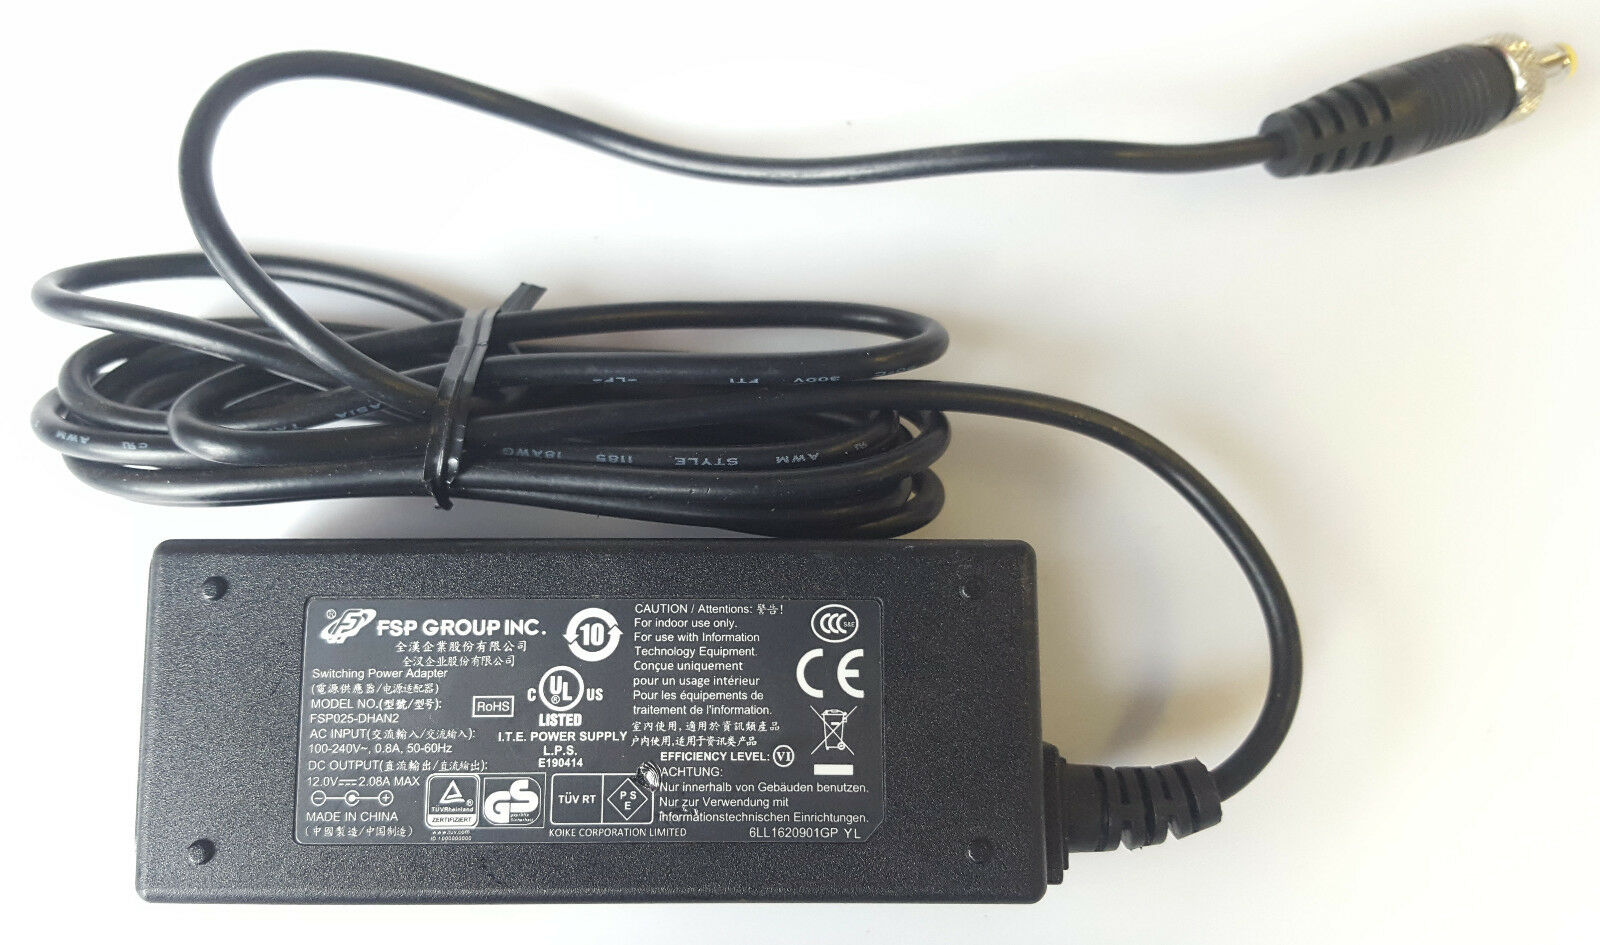 New FSP GROUP INC. FSP025-DHAN2 12V 2.08A 9NA0253004 AC/DC POWER SUPPLY ADAPTER